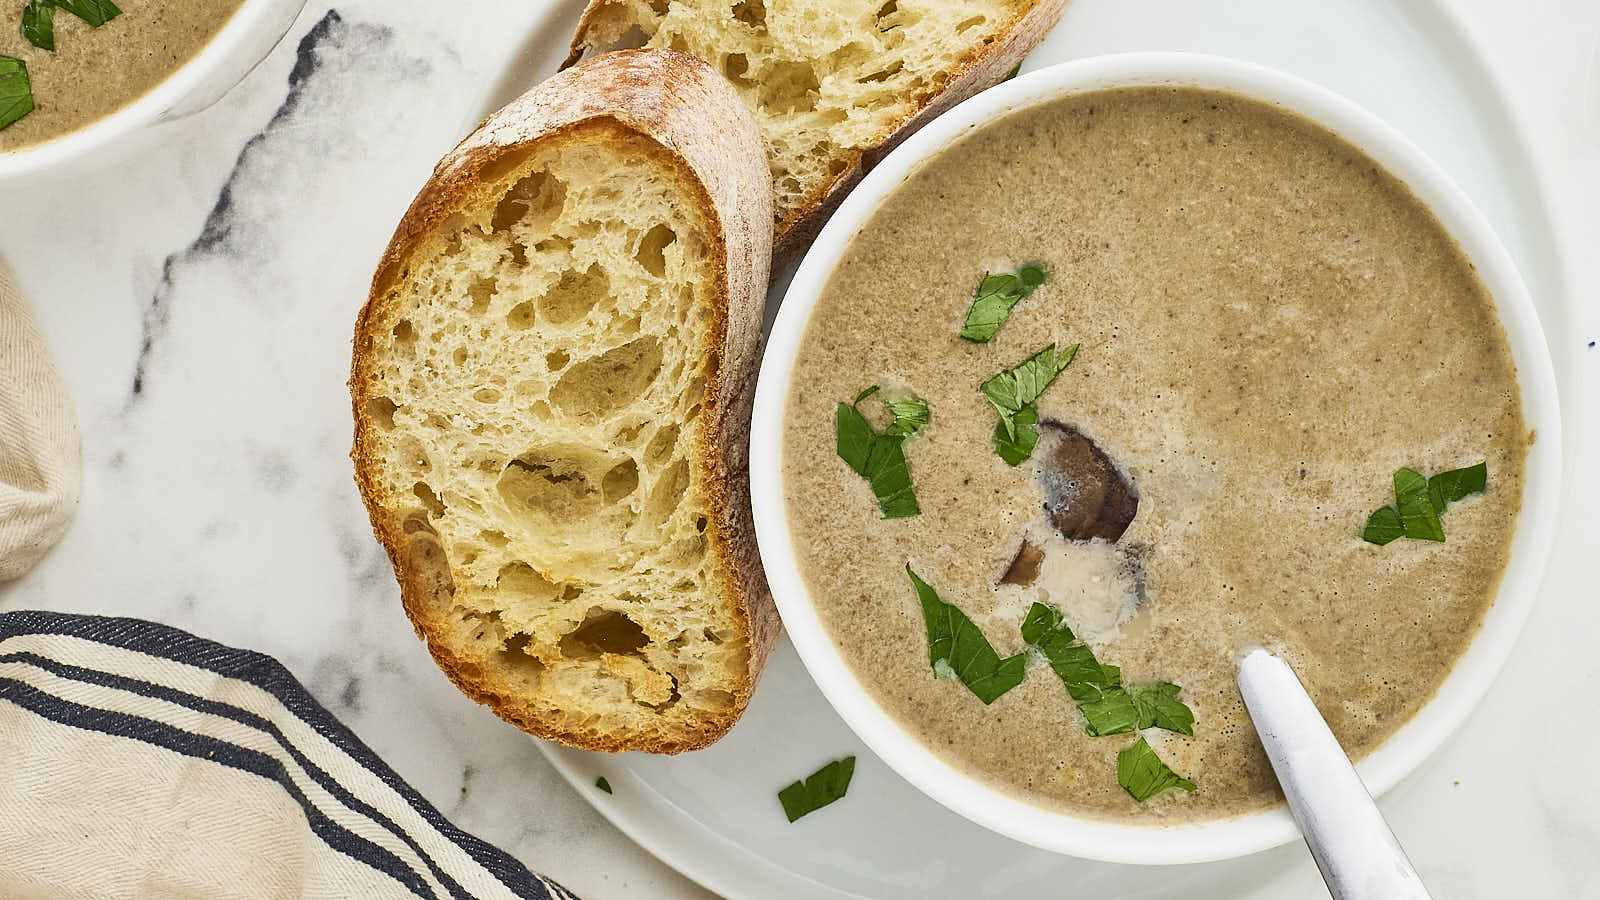 Mushroom Soup recipe by Cheerful Cook.